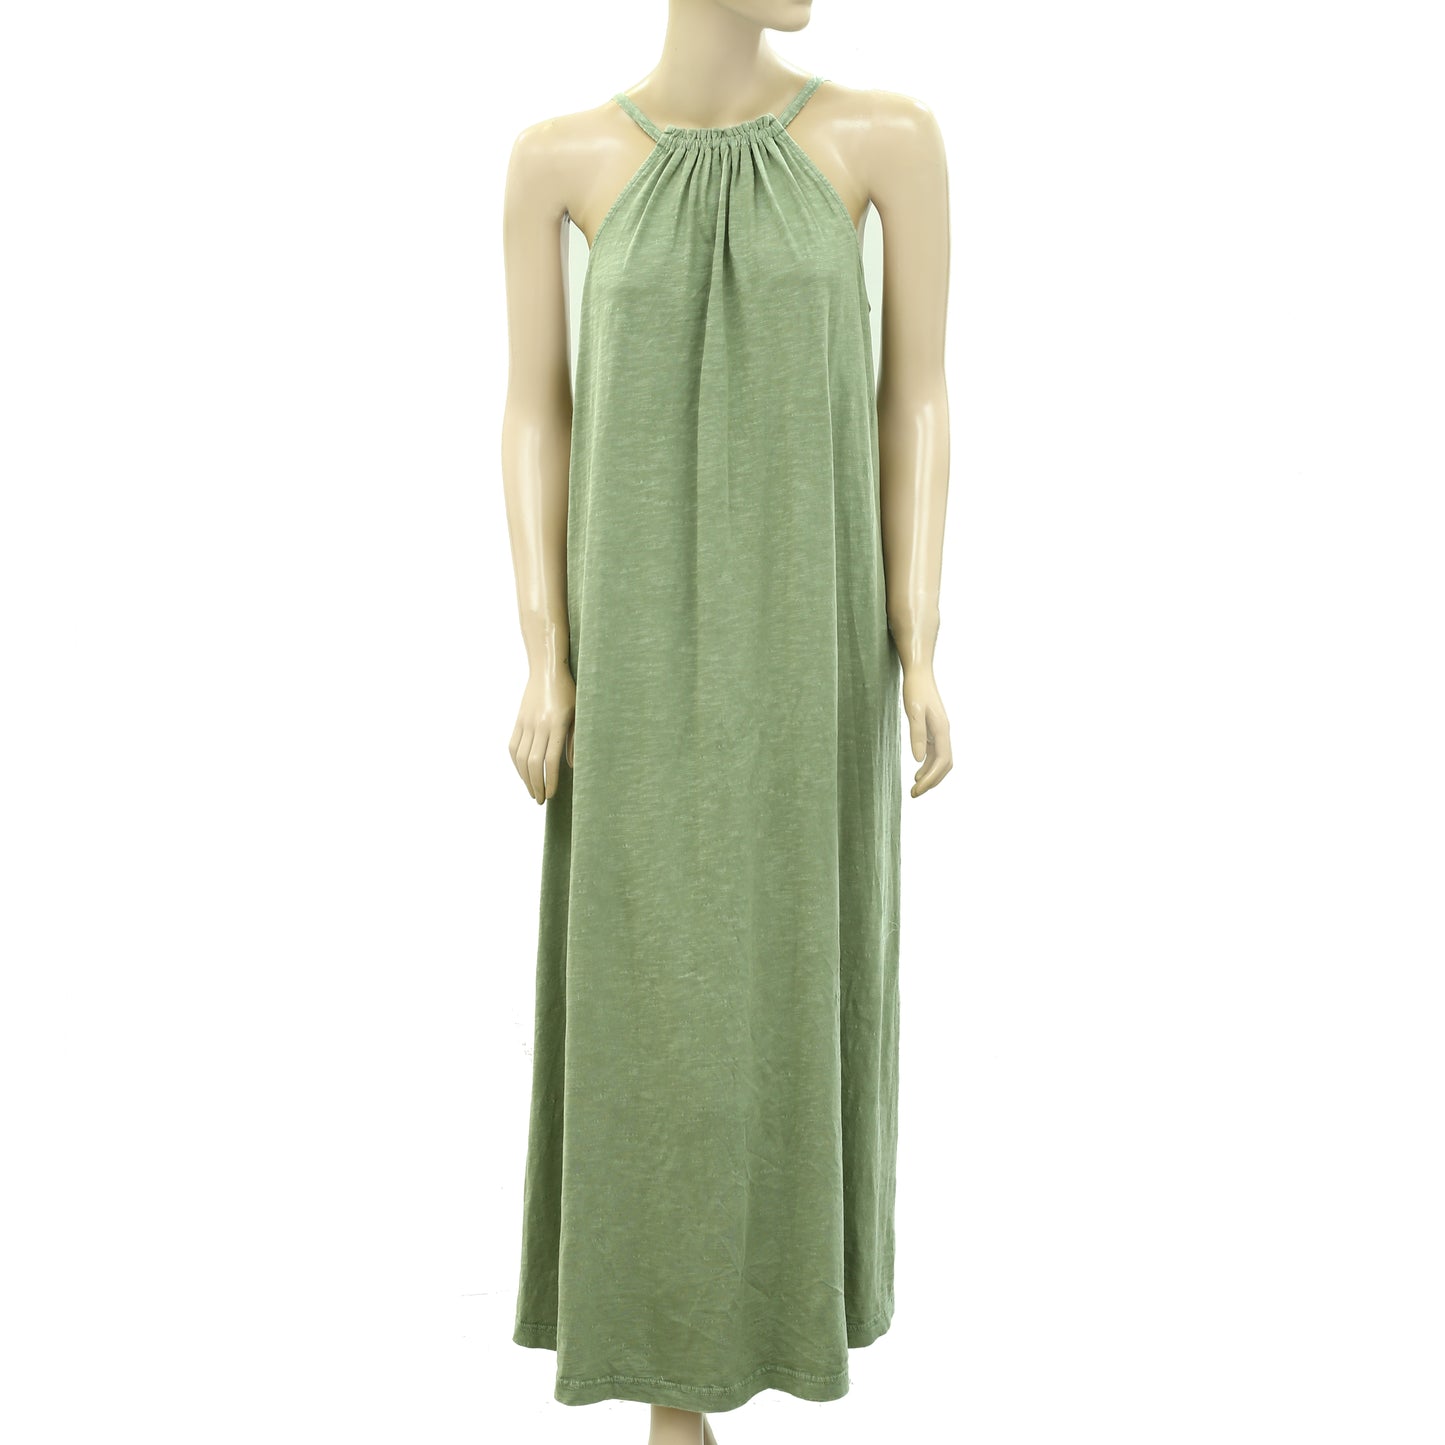 By Anthropologie A-Line Maxi Dress